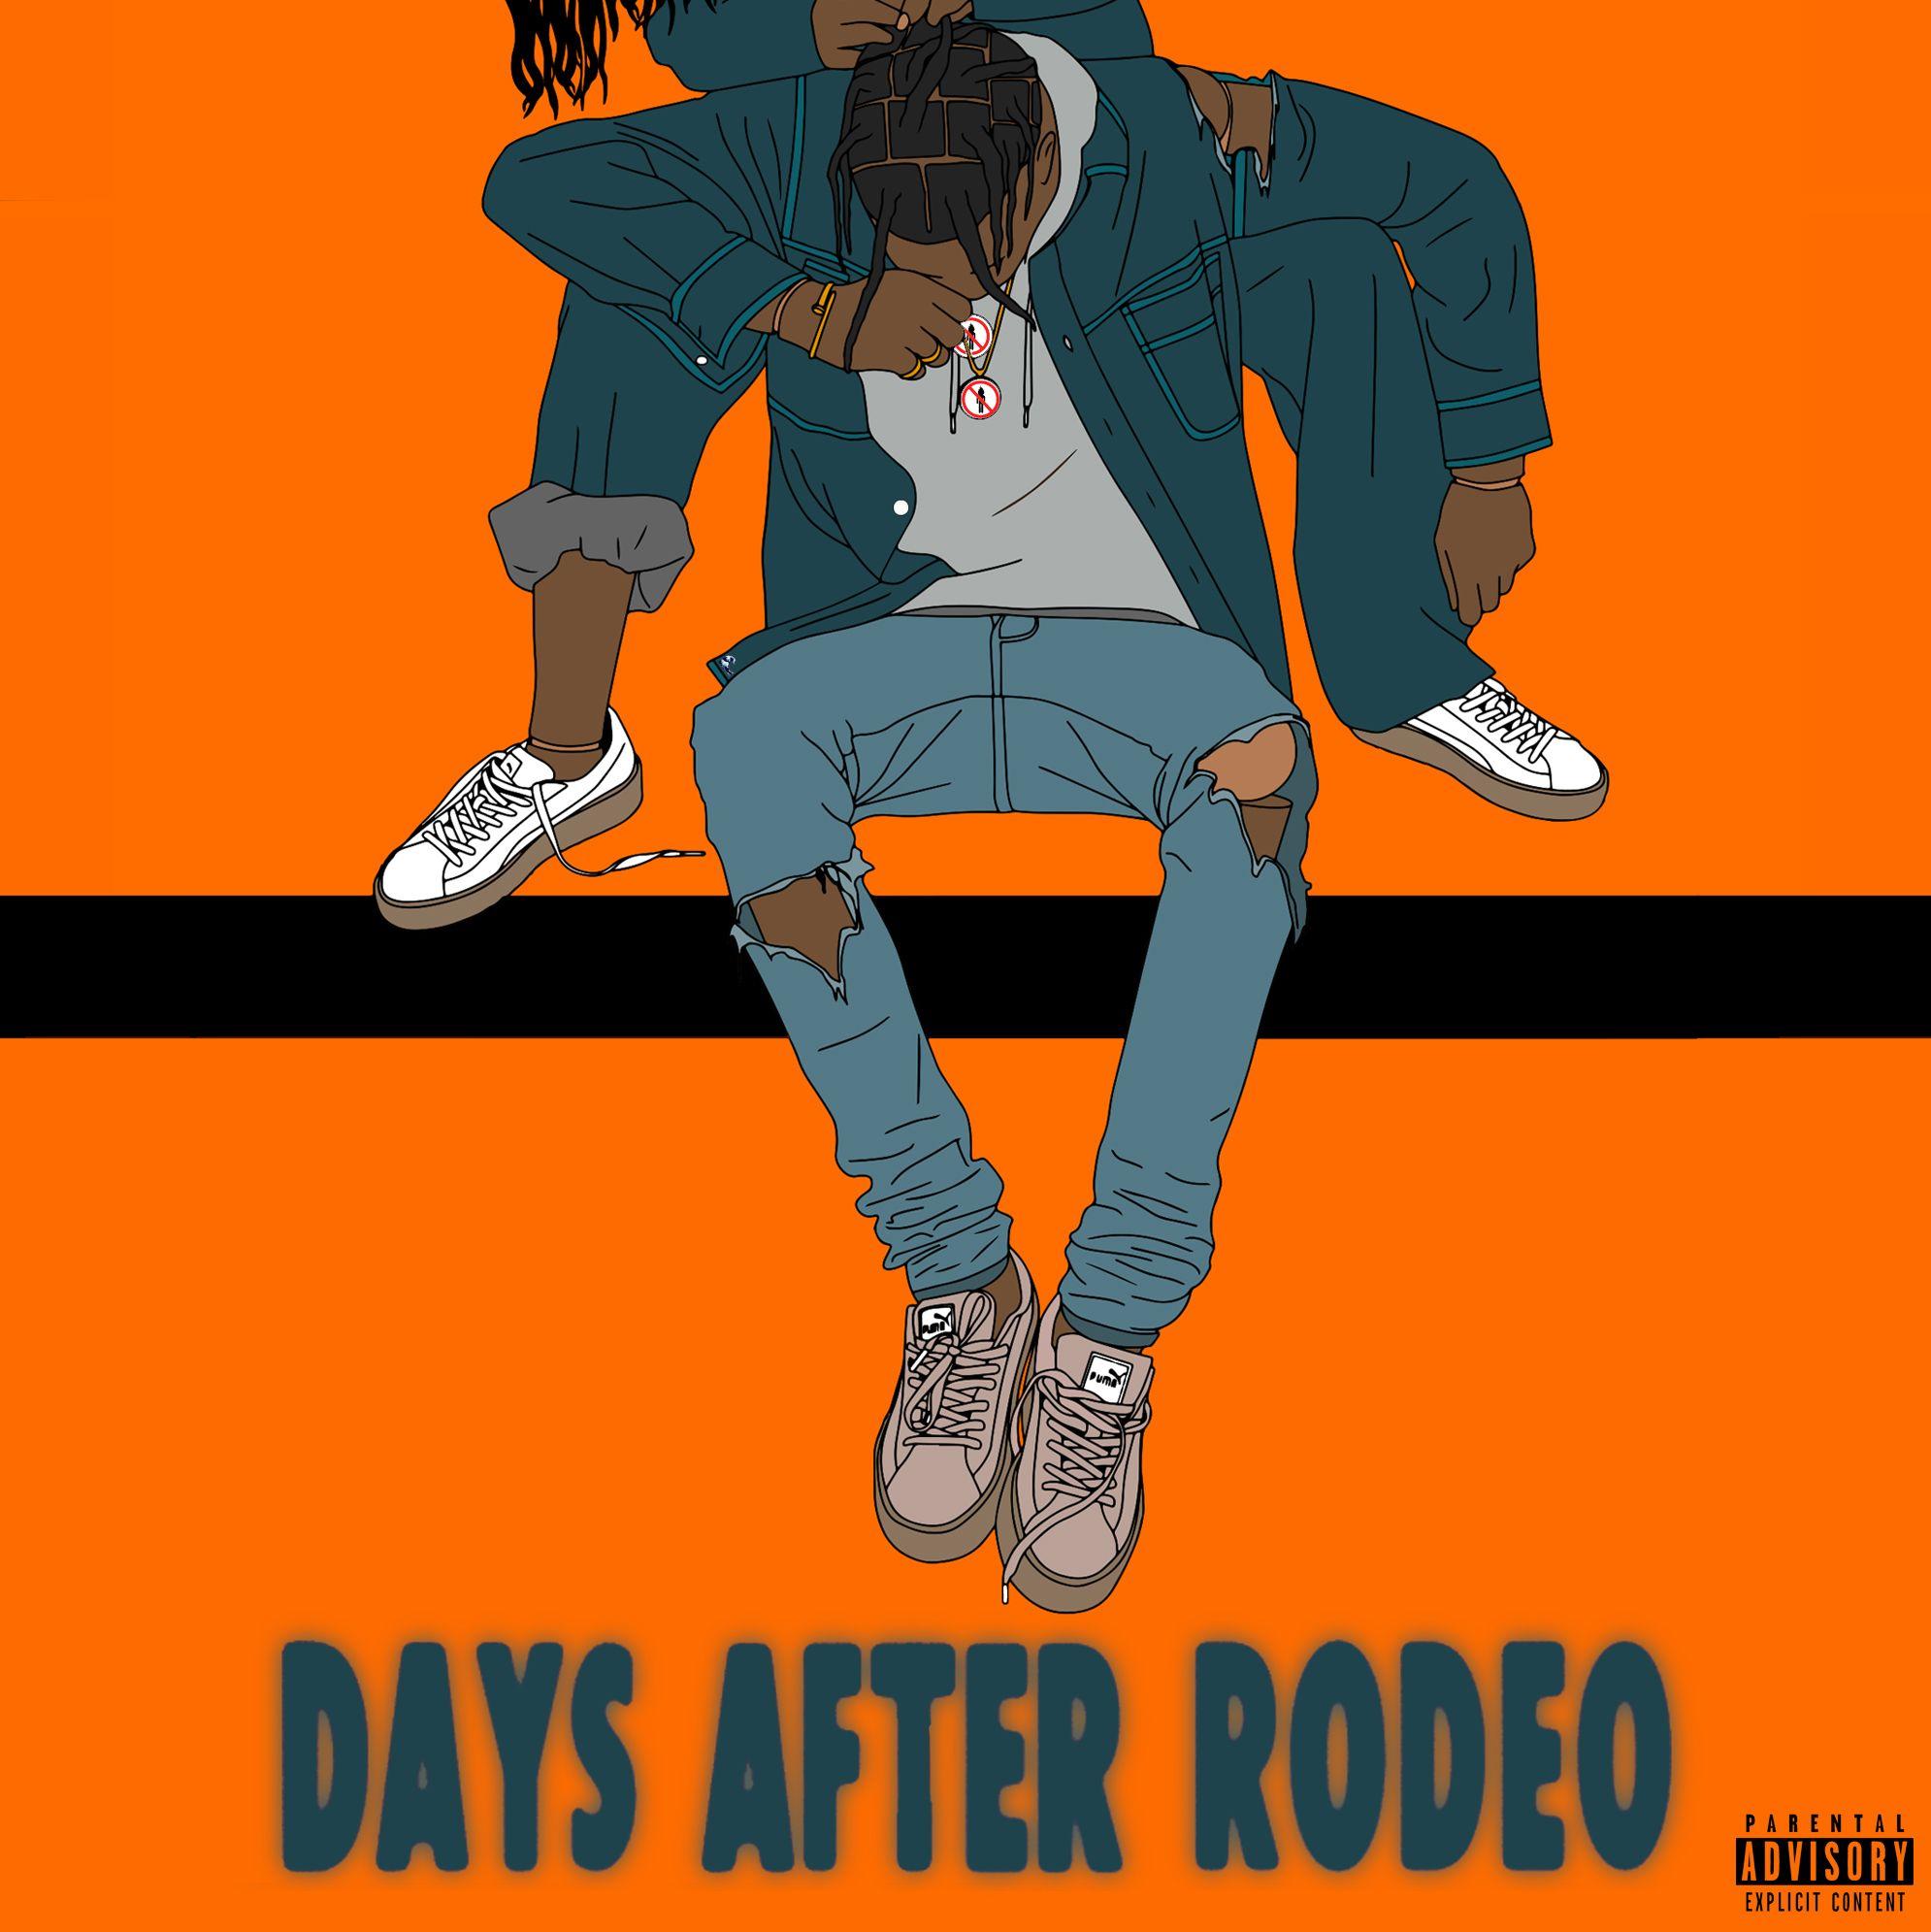 Travis Scott After Rodeo album cover. Thoughts fan art